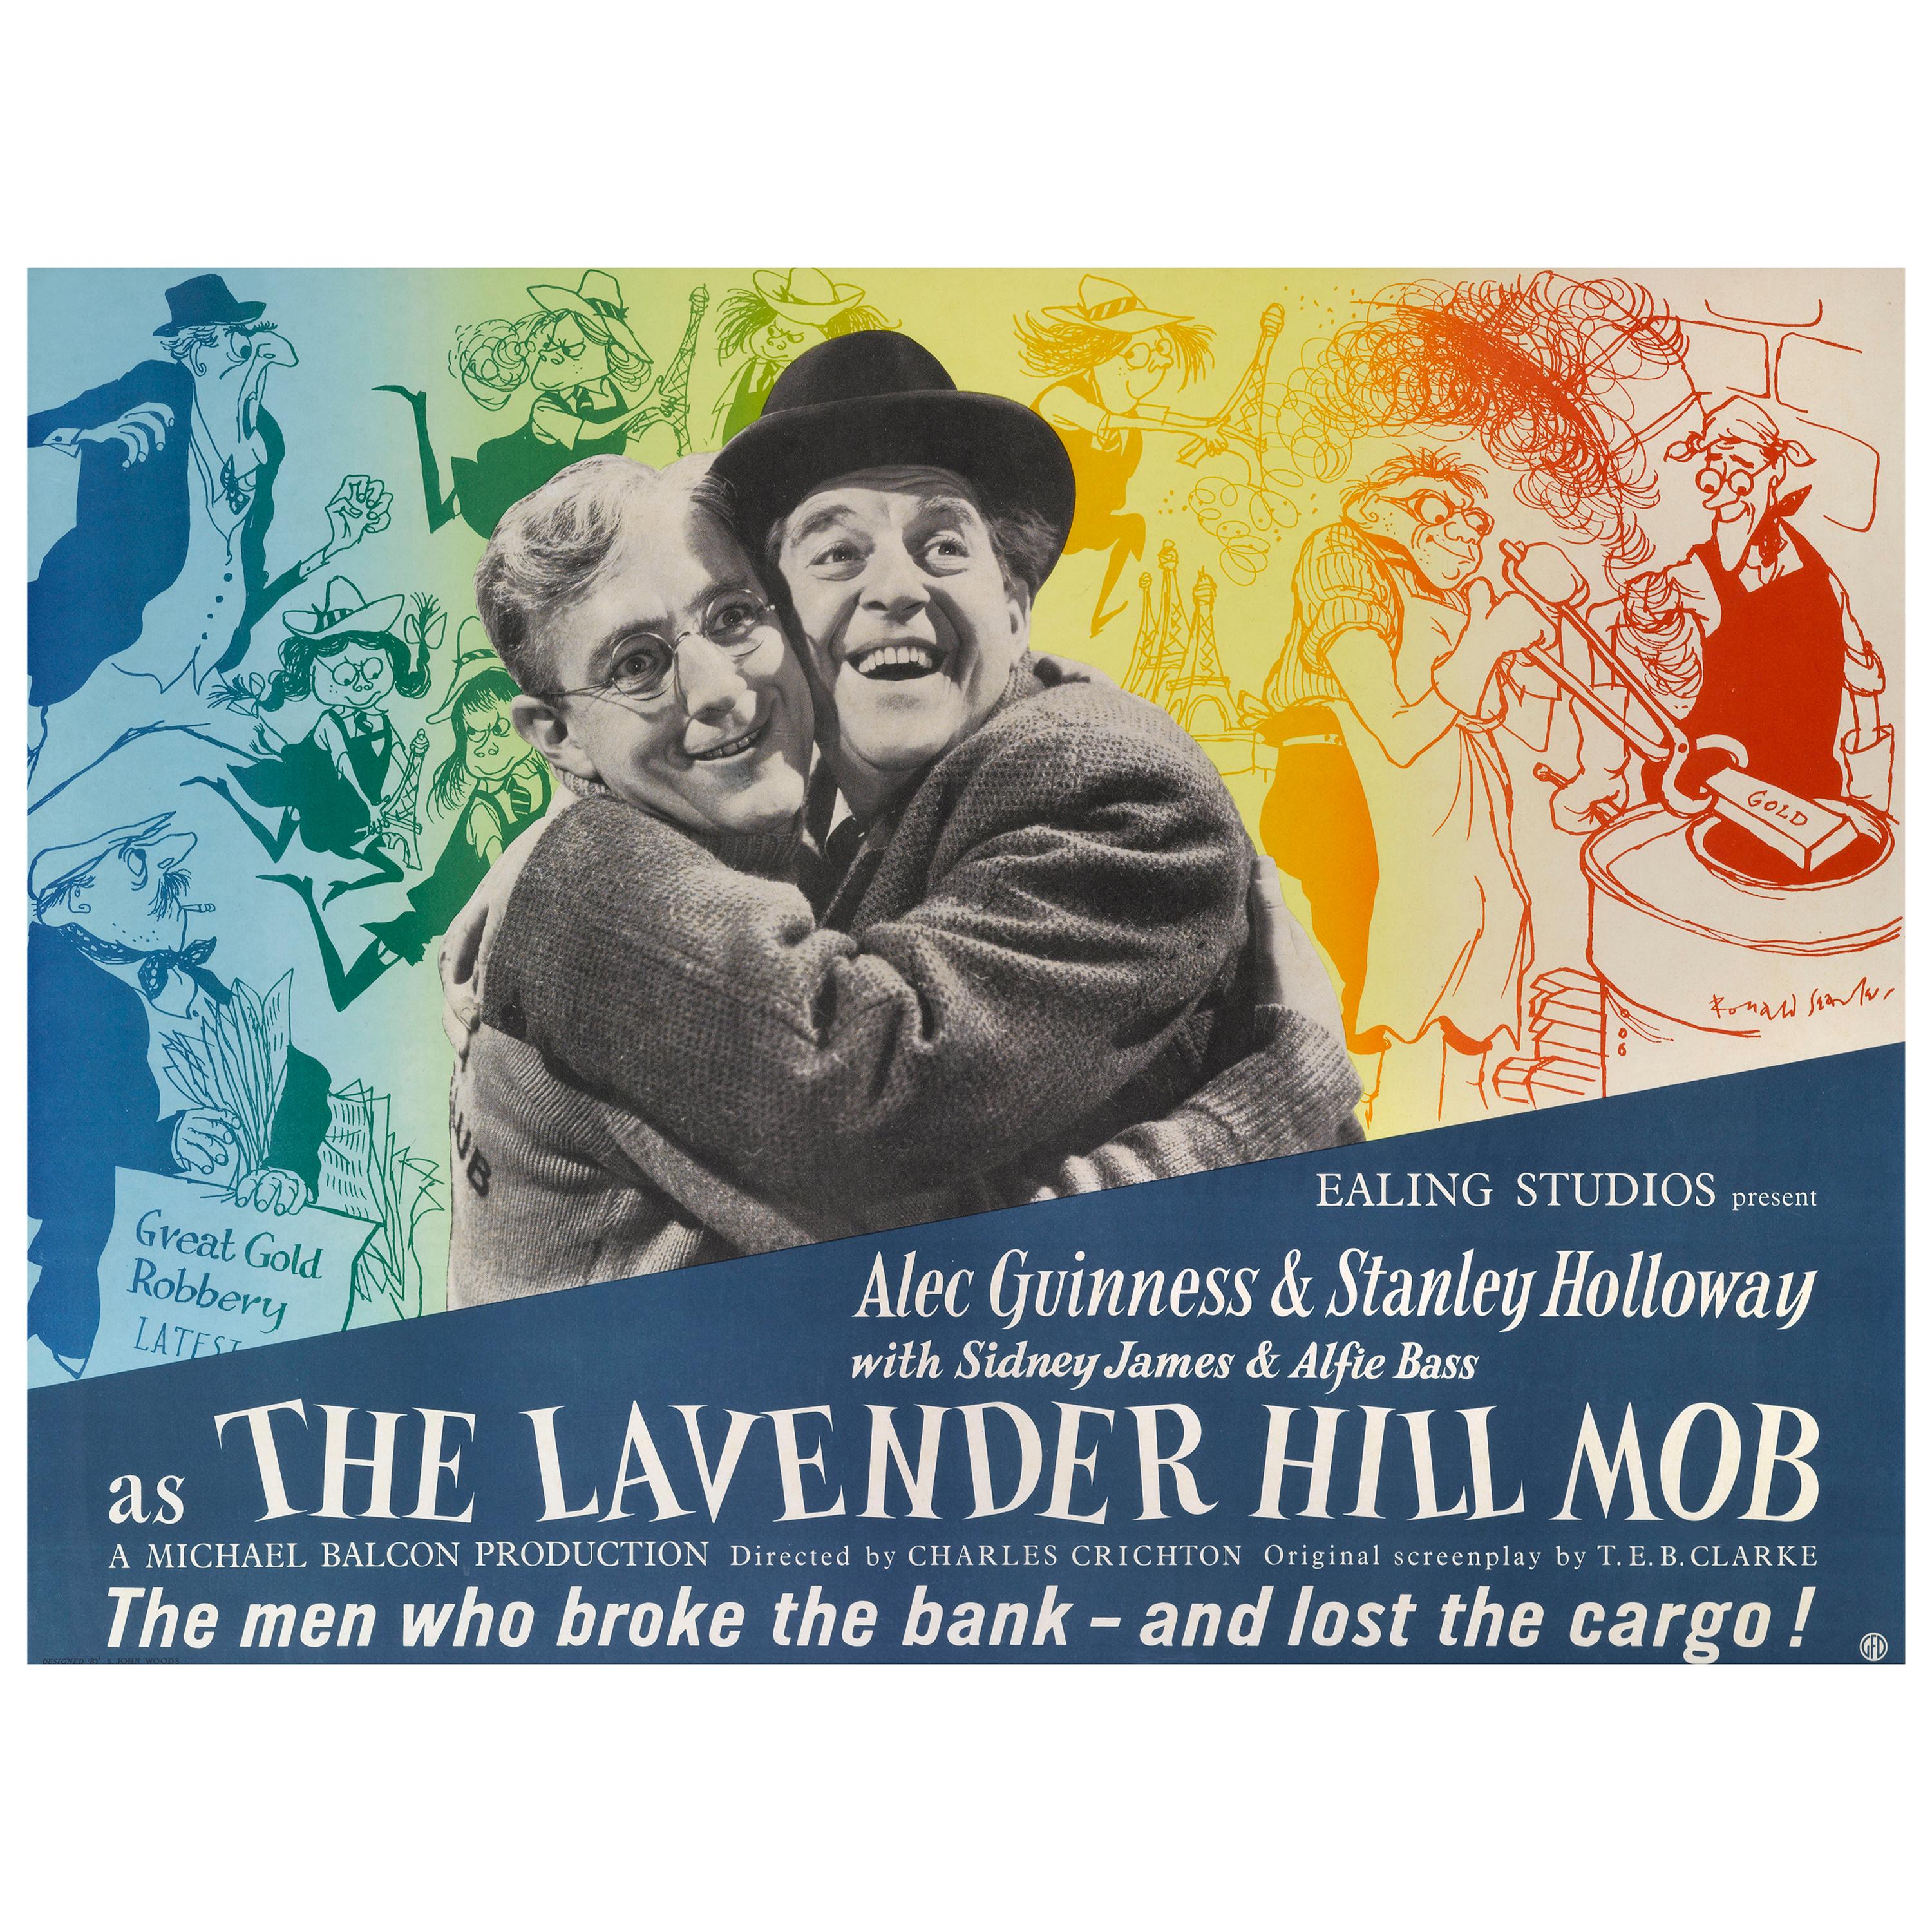 "The Lavender Hill Mob" Film Poster